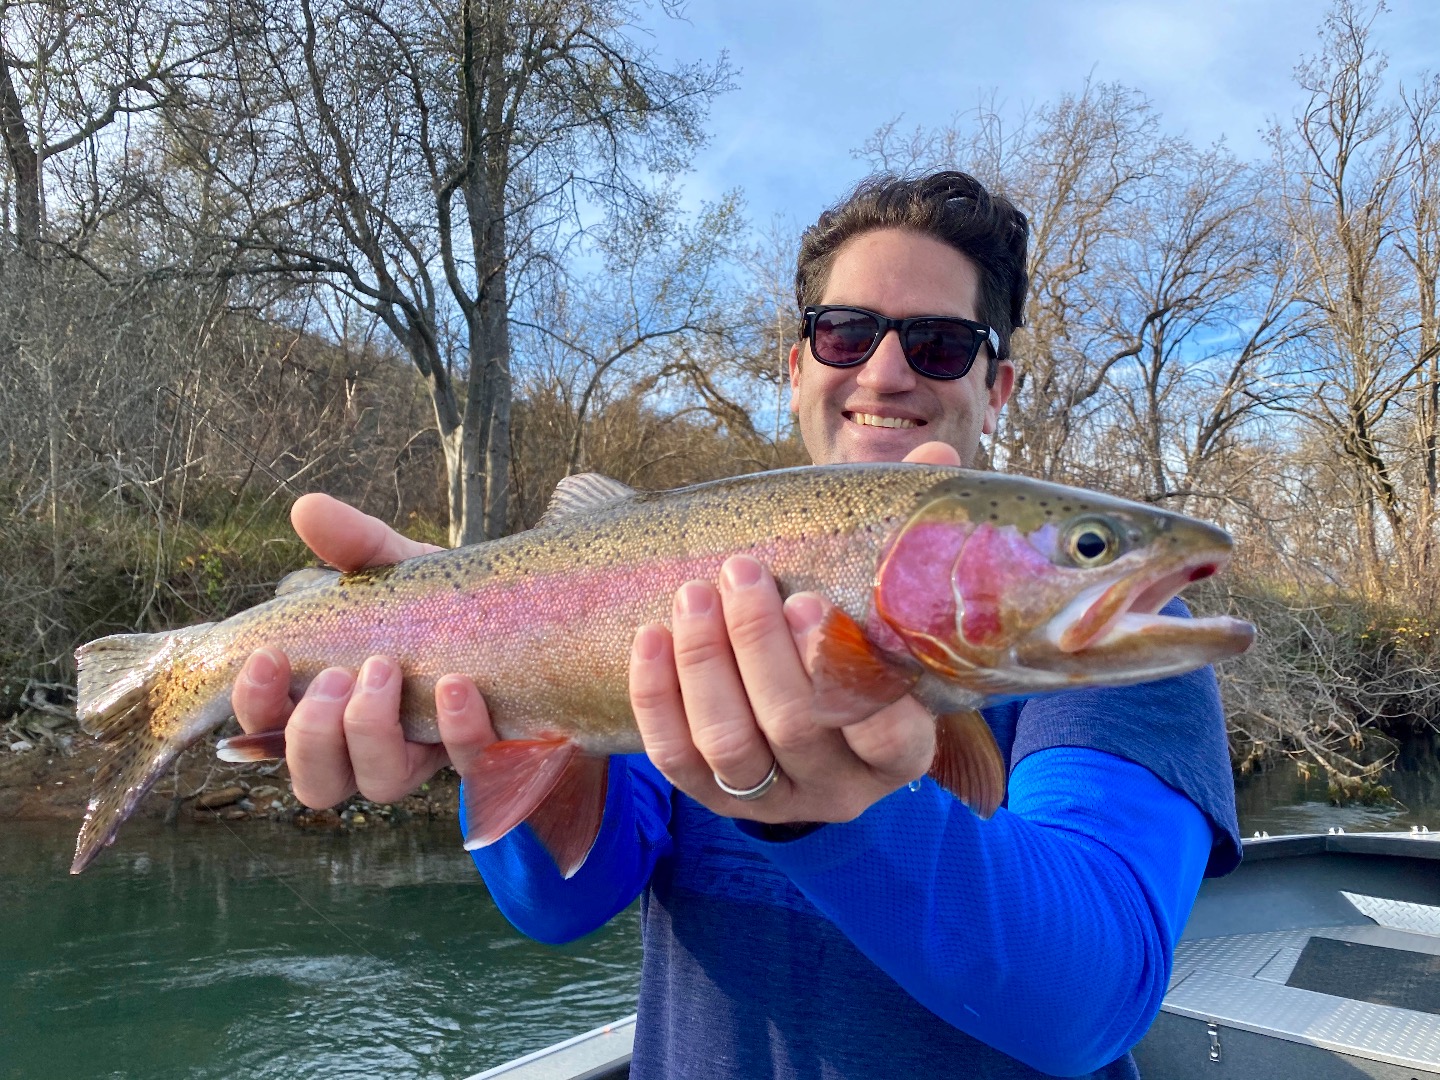 Sac River trout being caught daily!